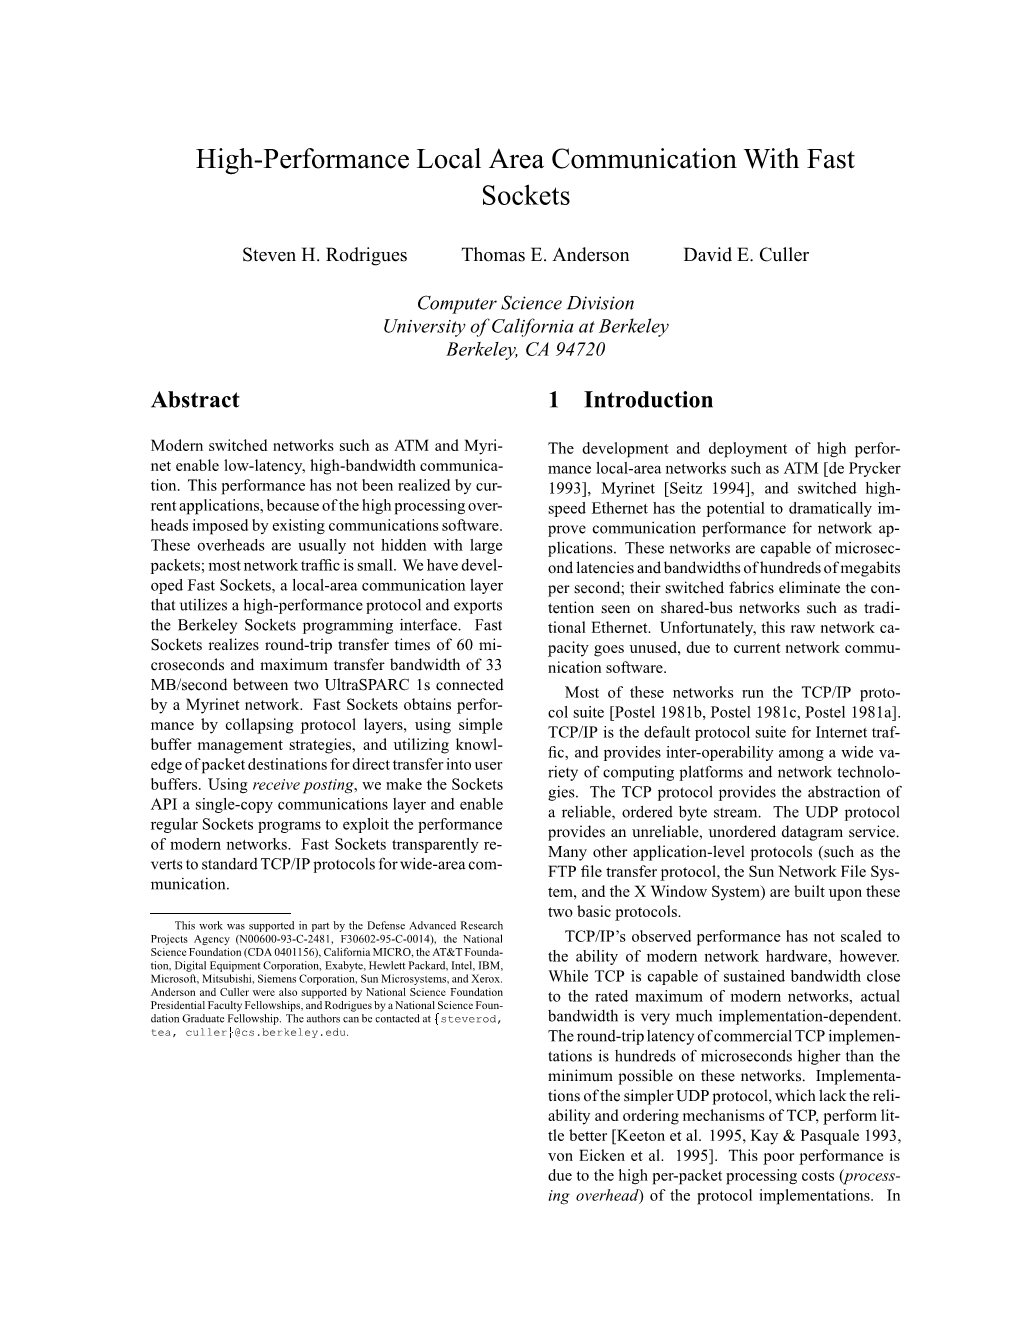 High-Performance Local Area Communication with Fast Sockets